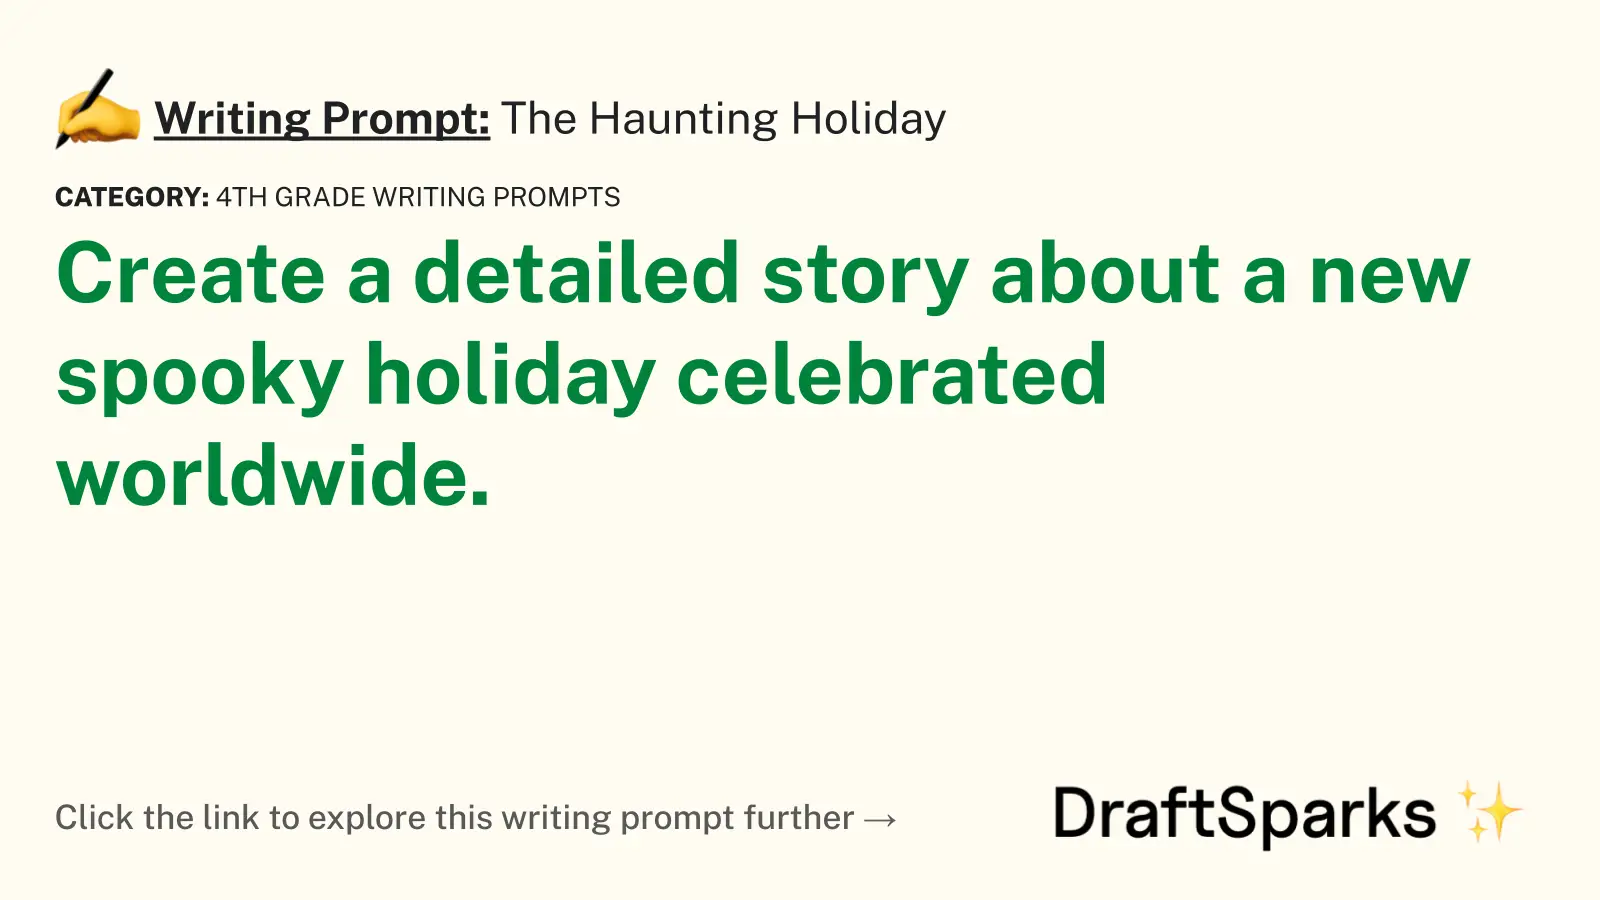 The Haunting Holiday